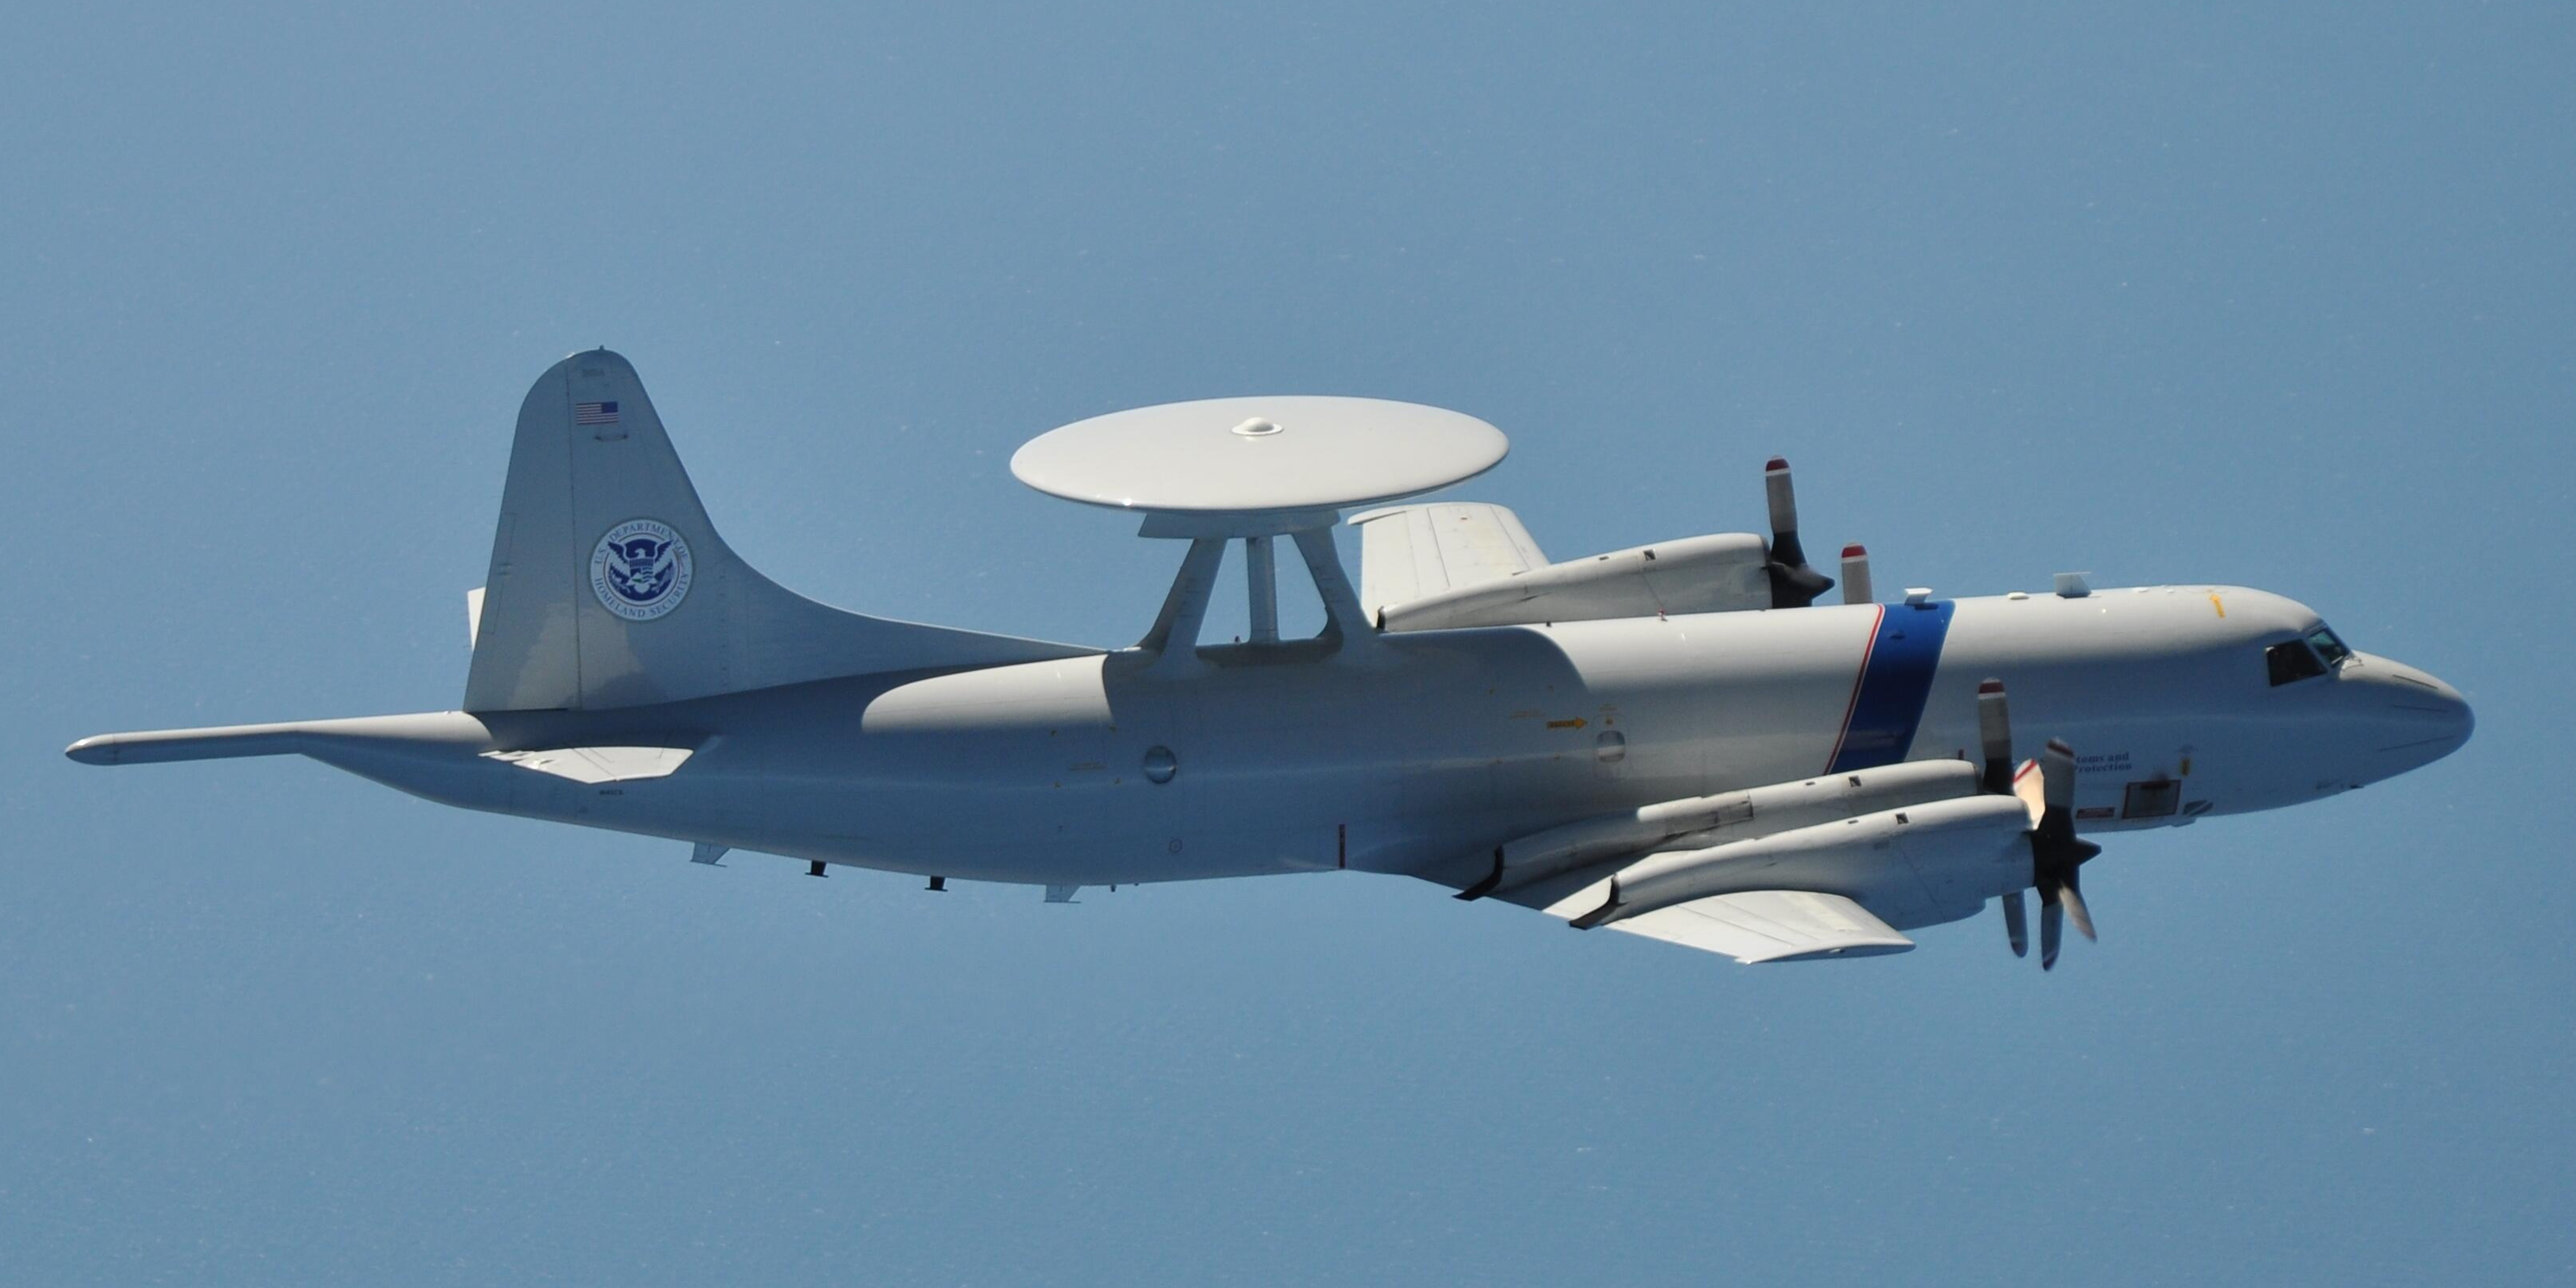 The P-3 Orion Helps the Feds Seize Over 77 Tons of Illegal Drugs